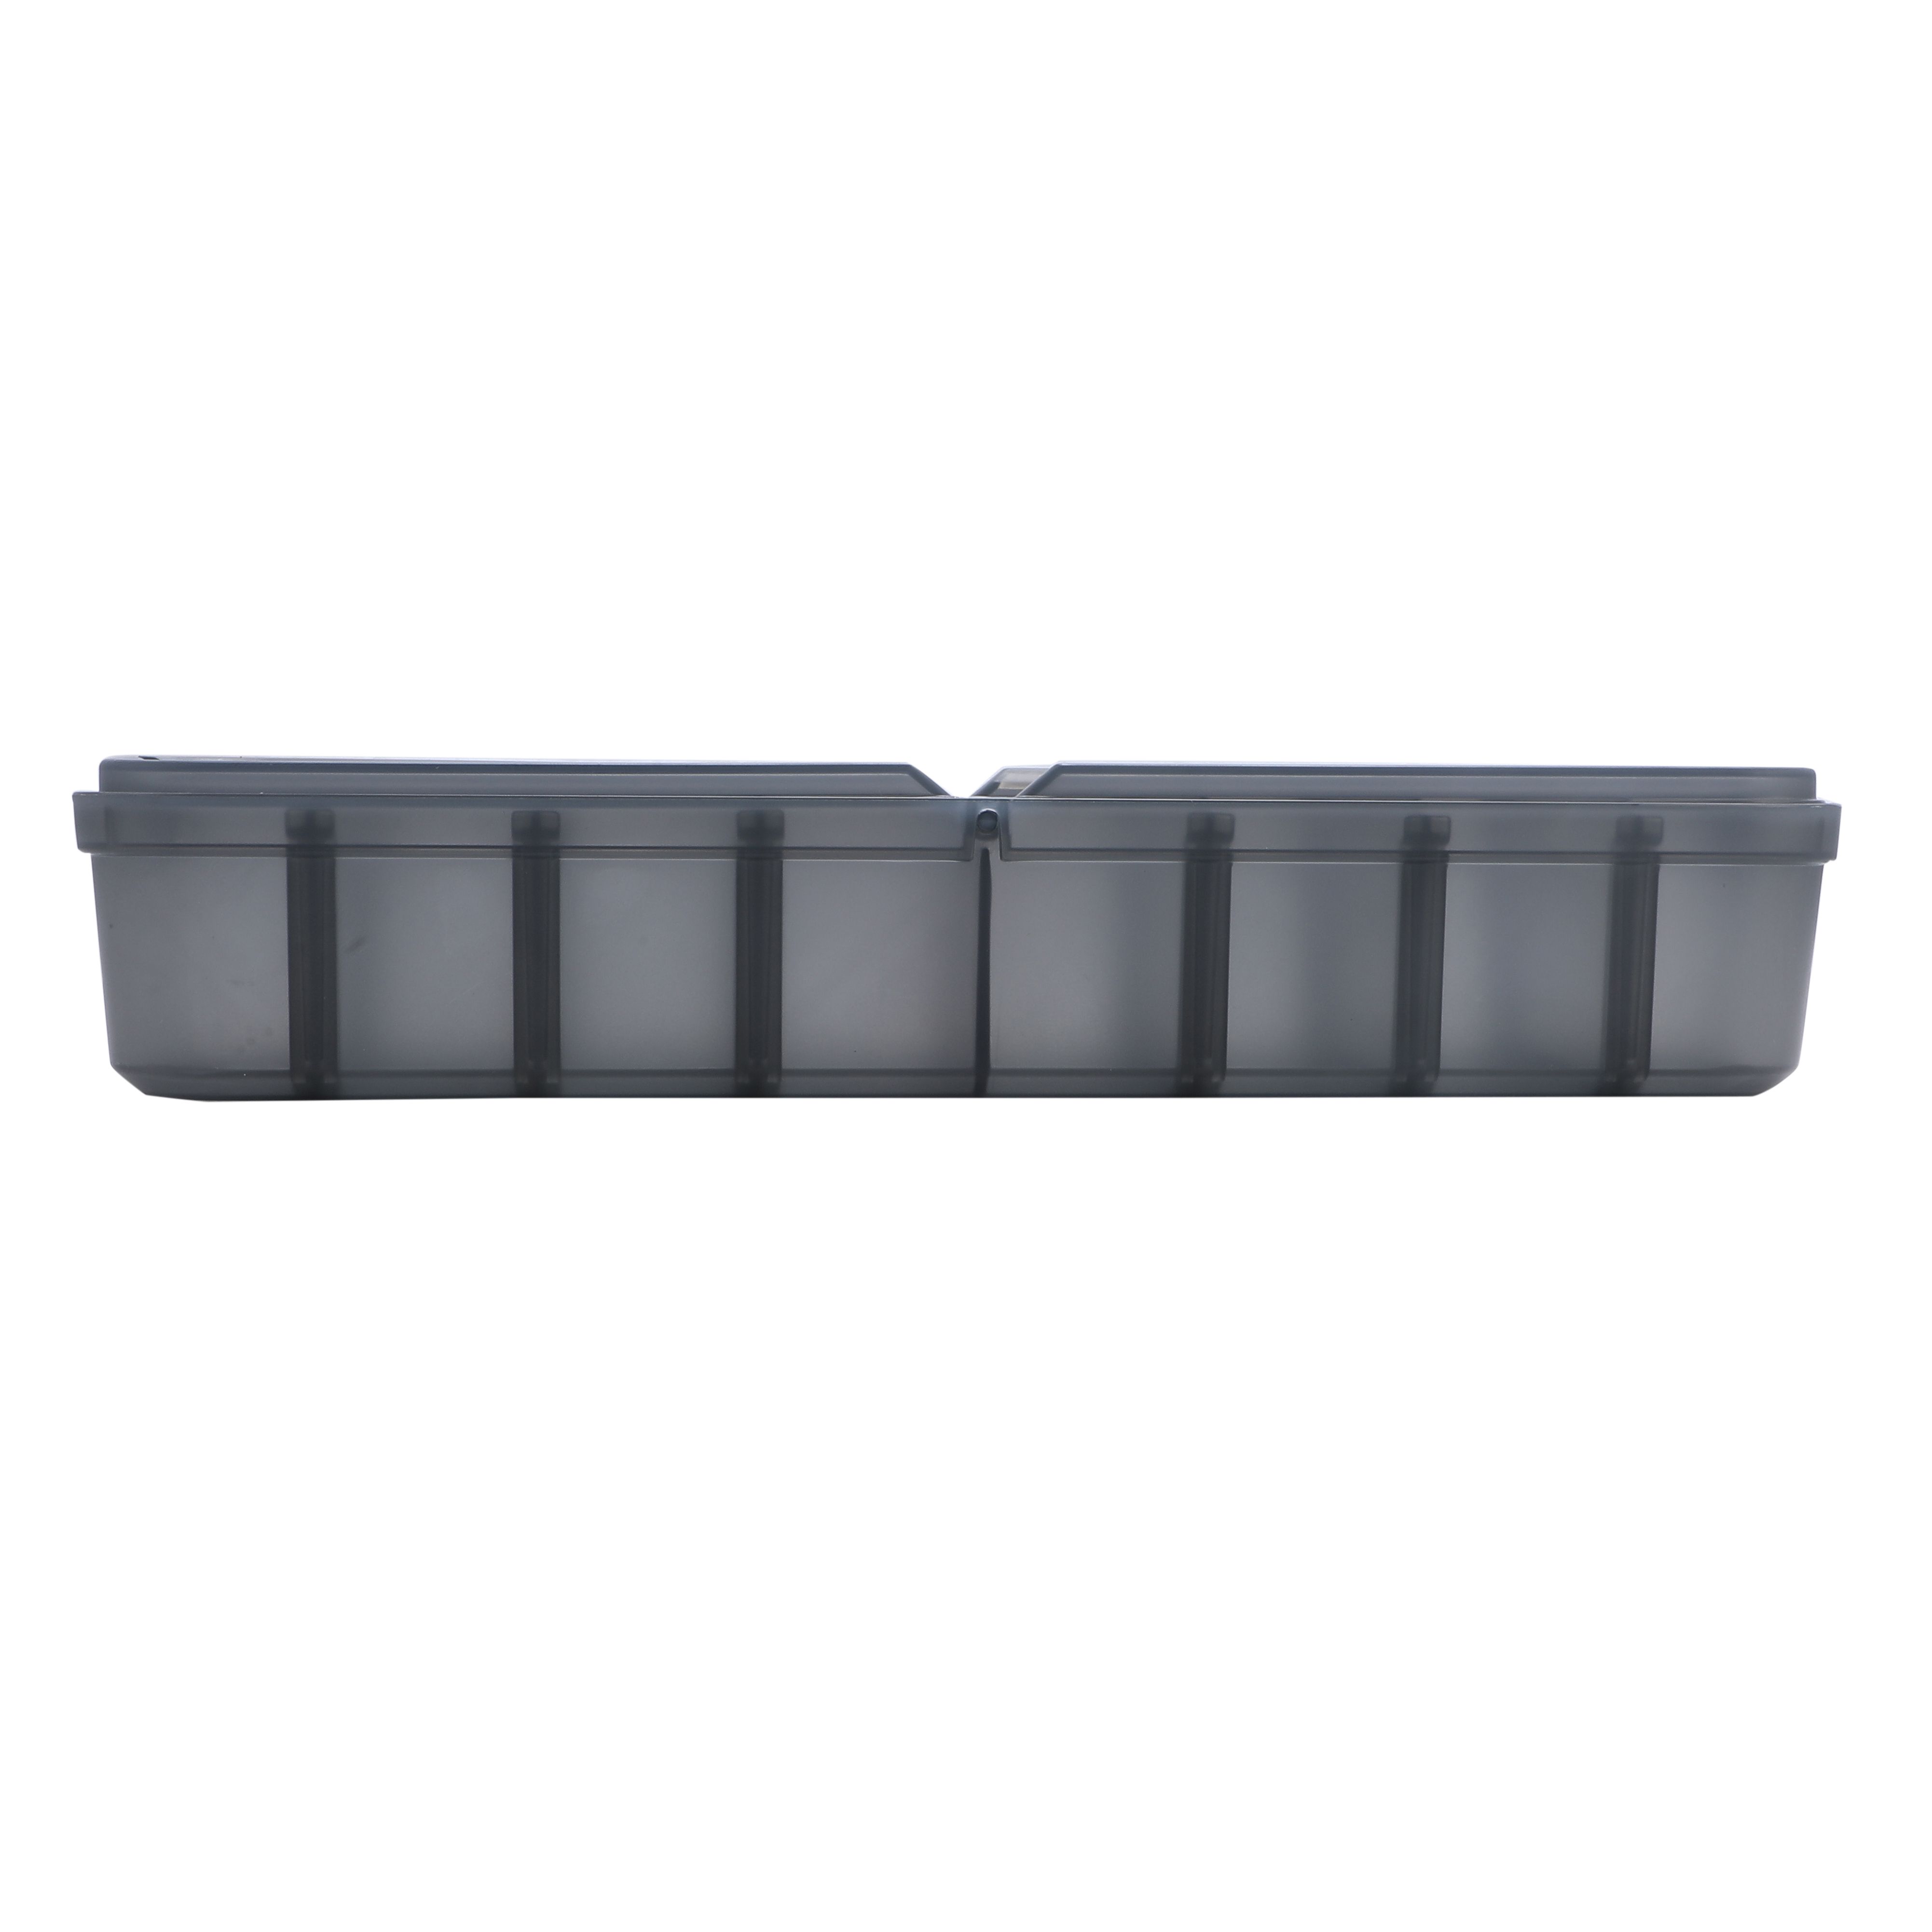 Ezy Storage Bunker tough Grey Insert tray with 8 compartment